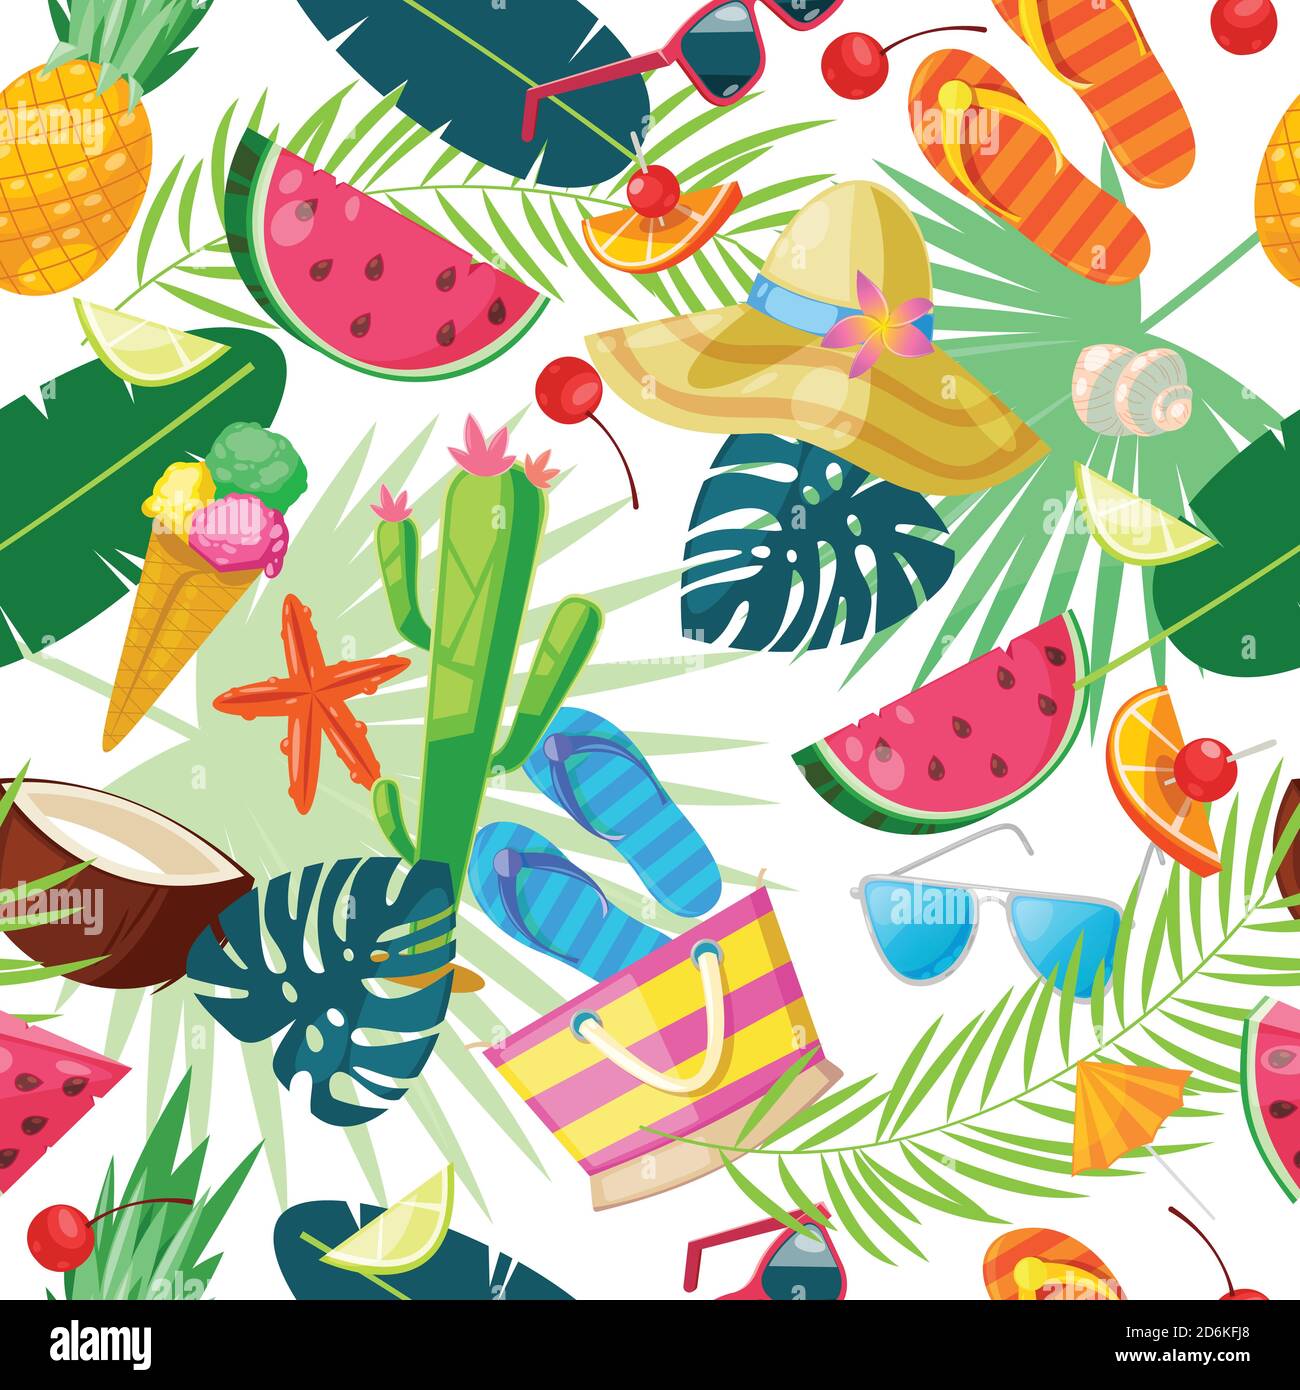 Summer Stock Vector Images - Alamy